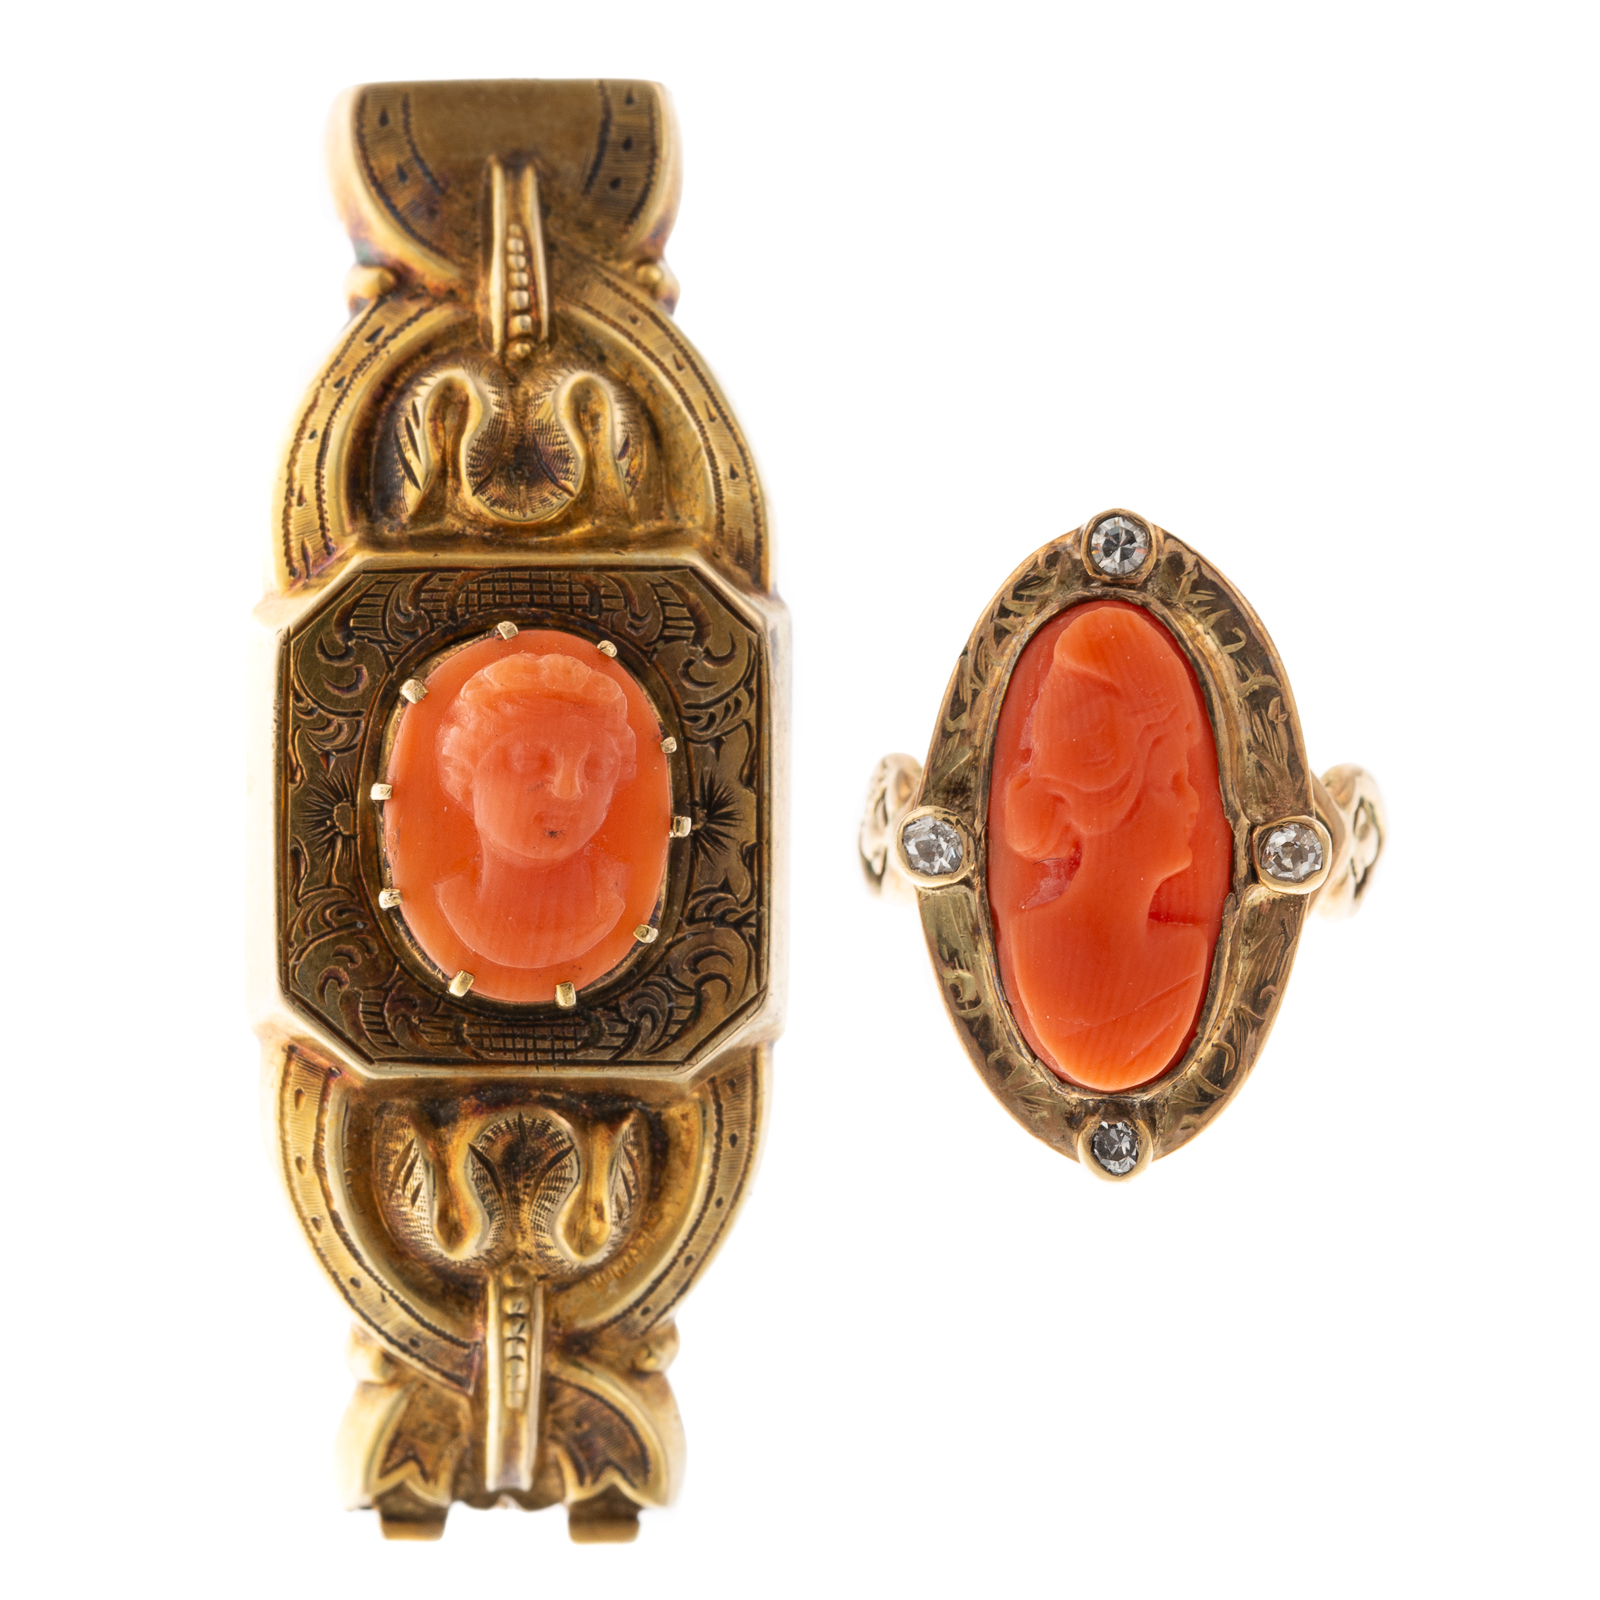 ANTIQUE CORAL CAMEO RING BROOCH 287b95